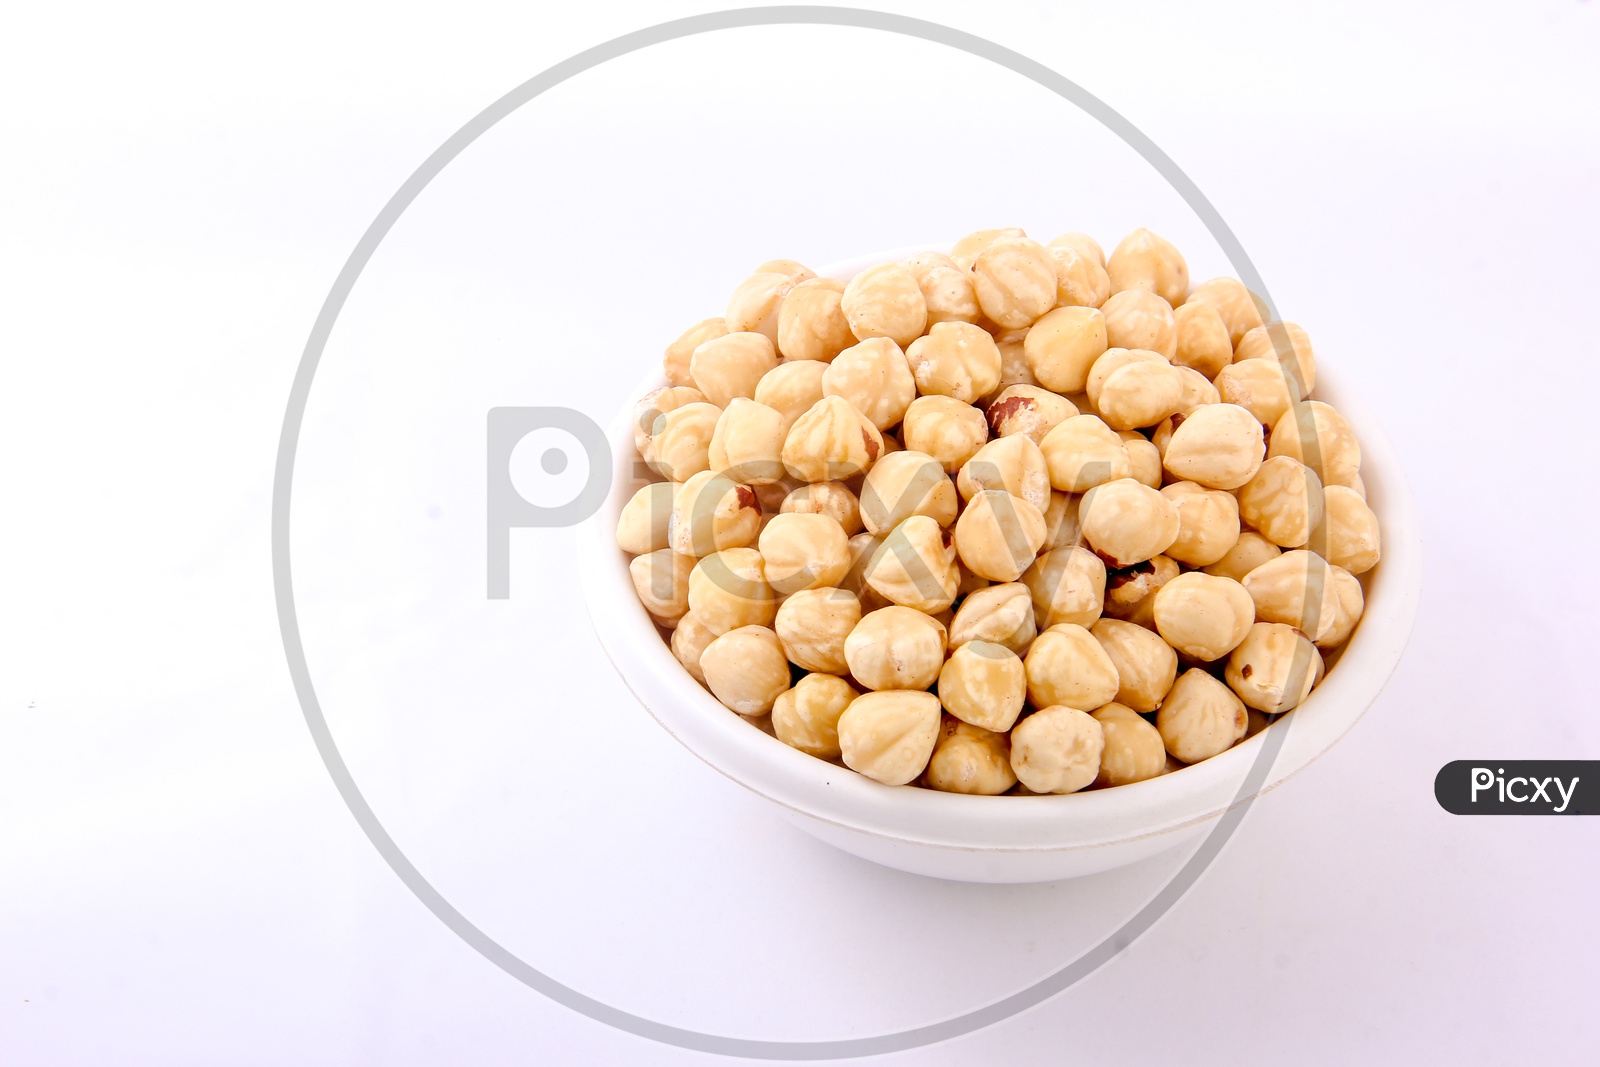 Chickpeas / Garbanzo Beans / Channa Dal / Kabuli Channa in a Bowl on an White Background